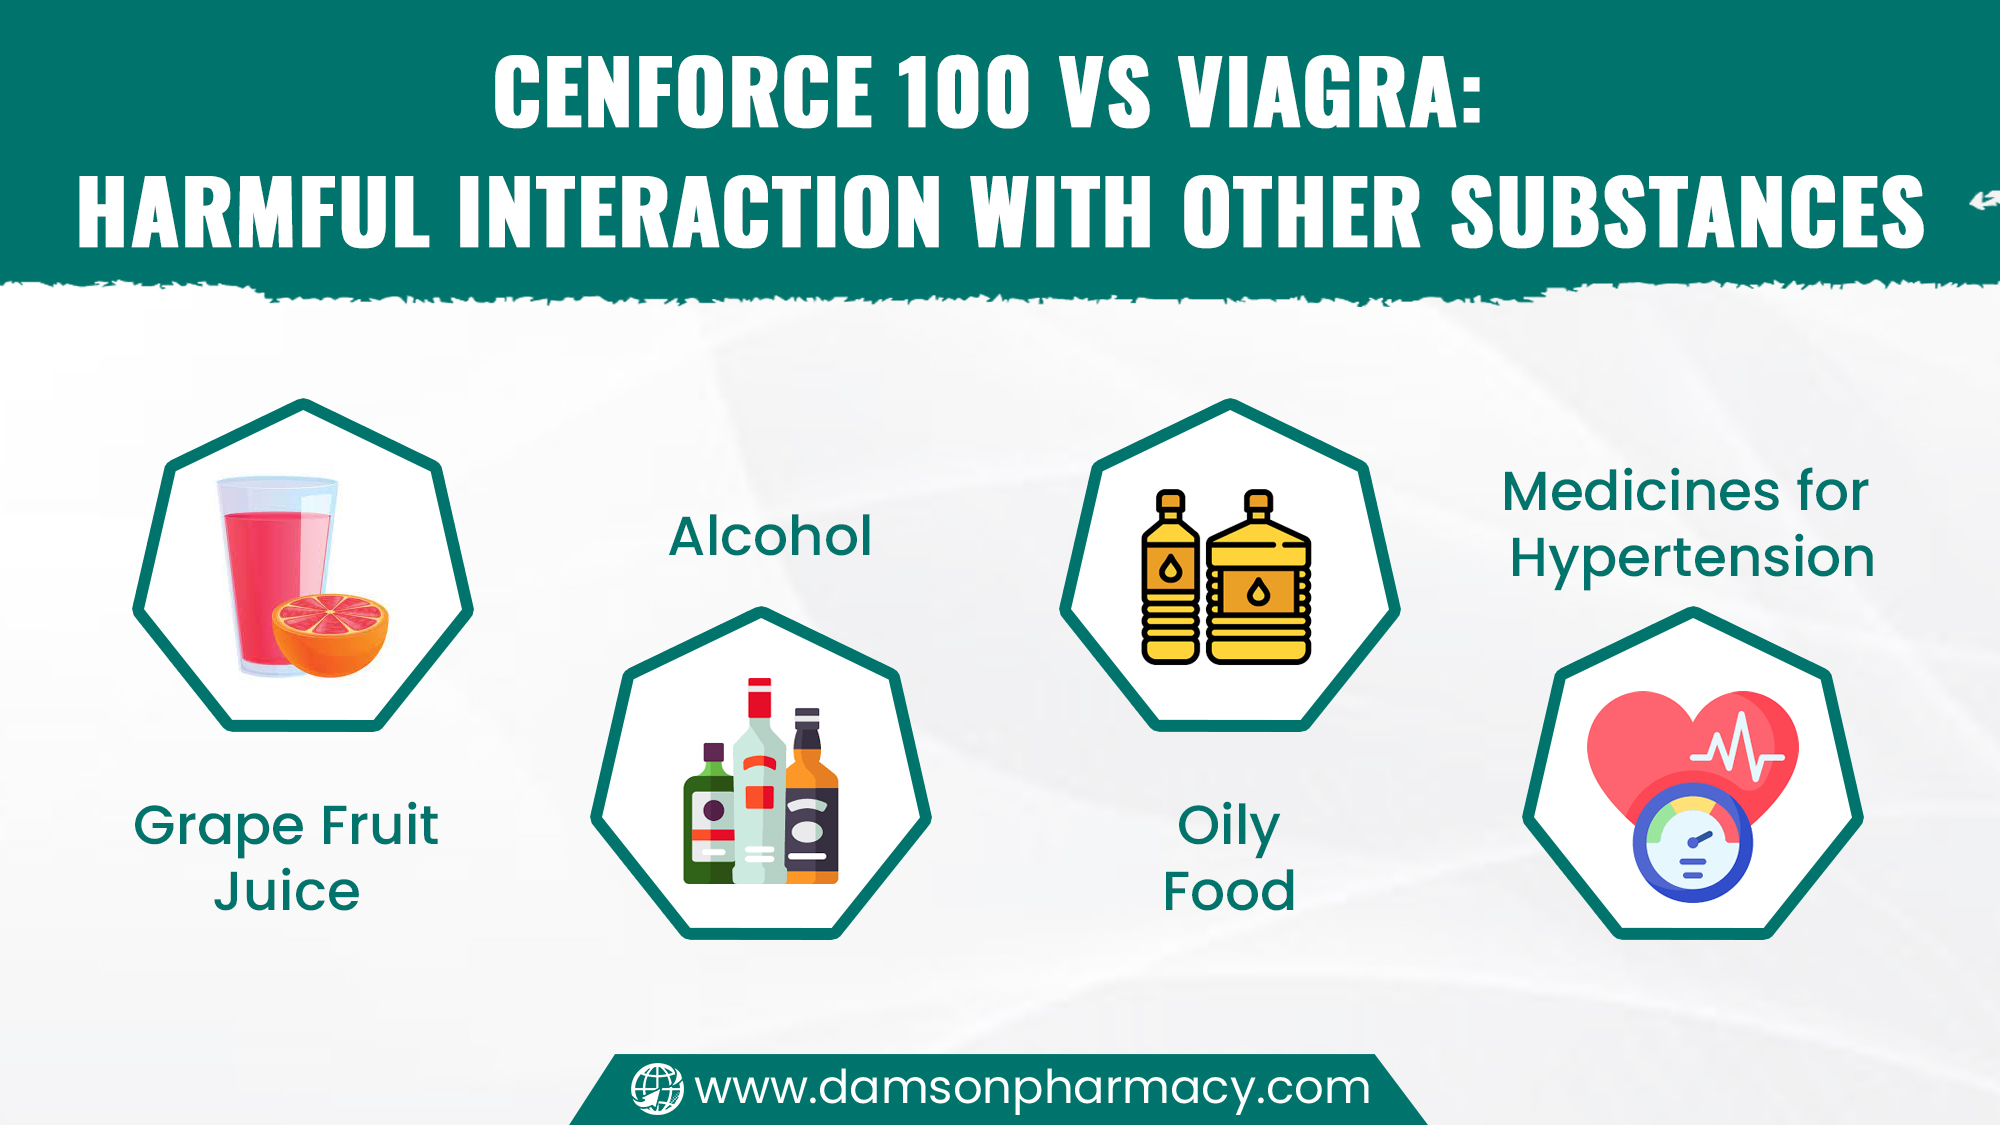 Cenforce 100 Vs Viagra Harmful Interaction with Other Substances